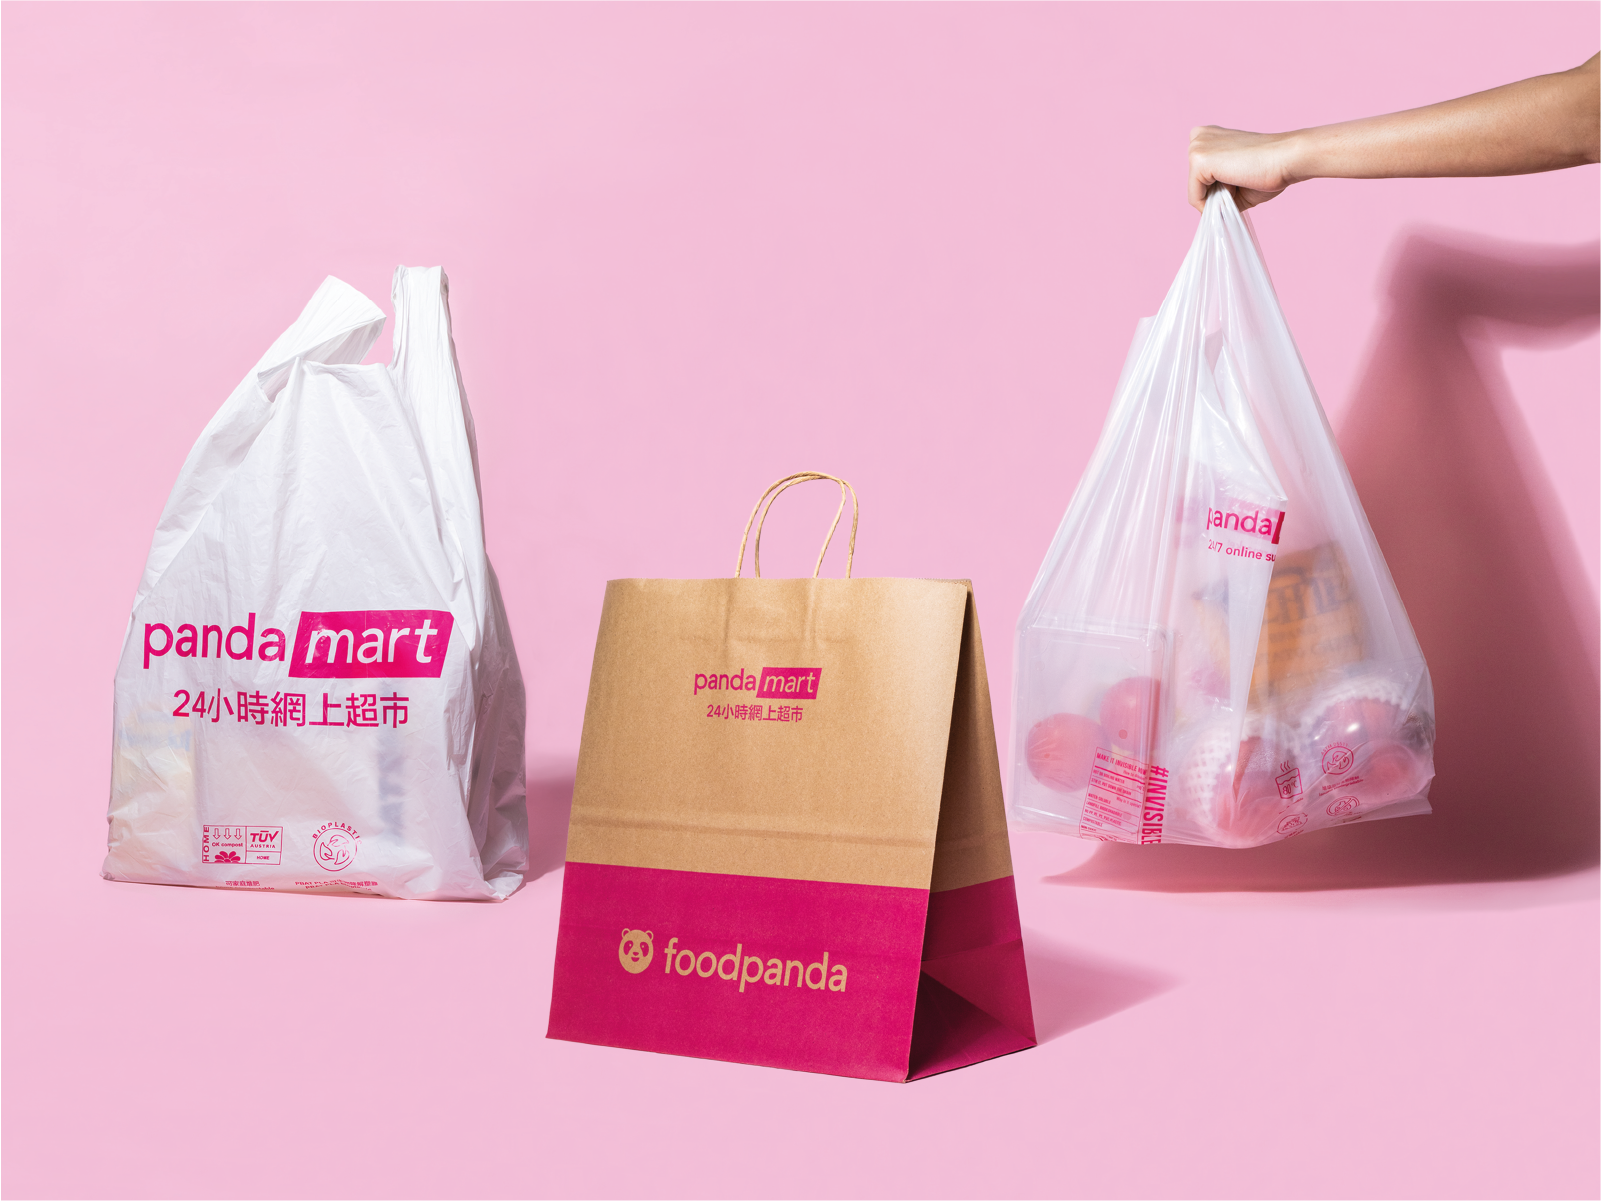 all pandamart stores have switched to eco-friendly shopping bags